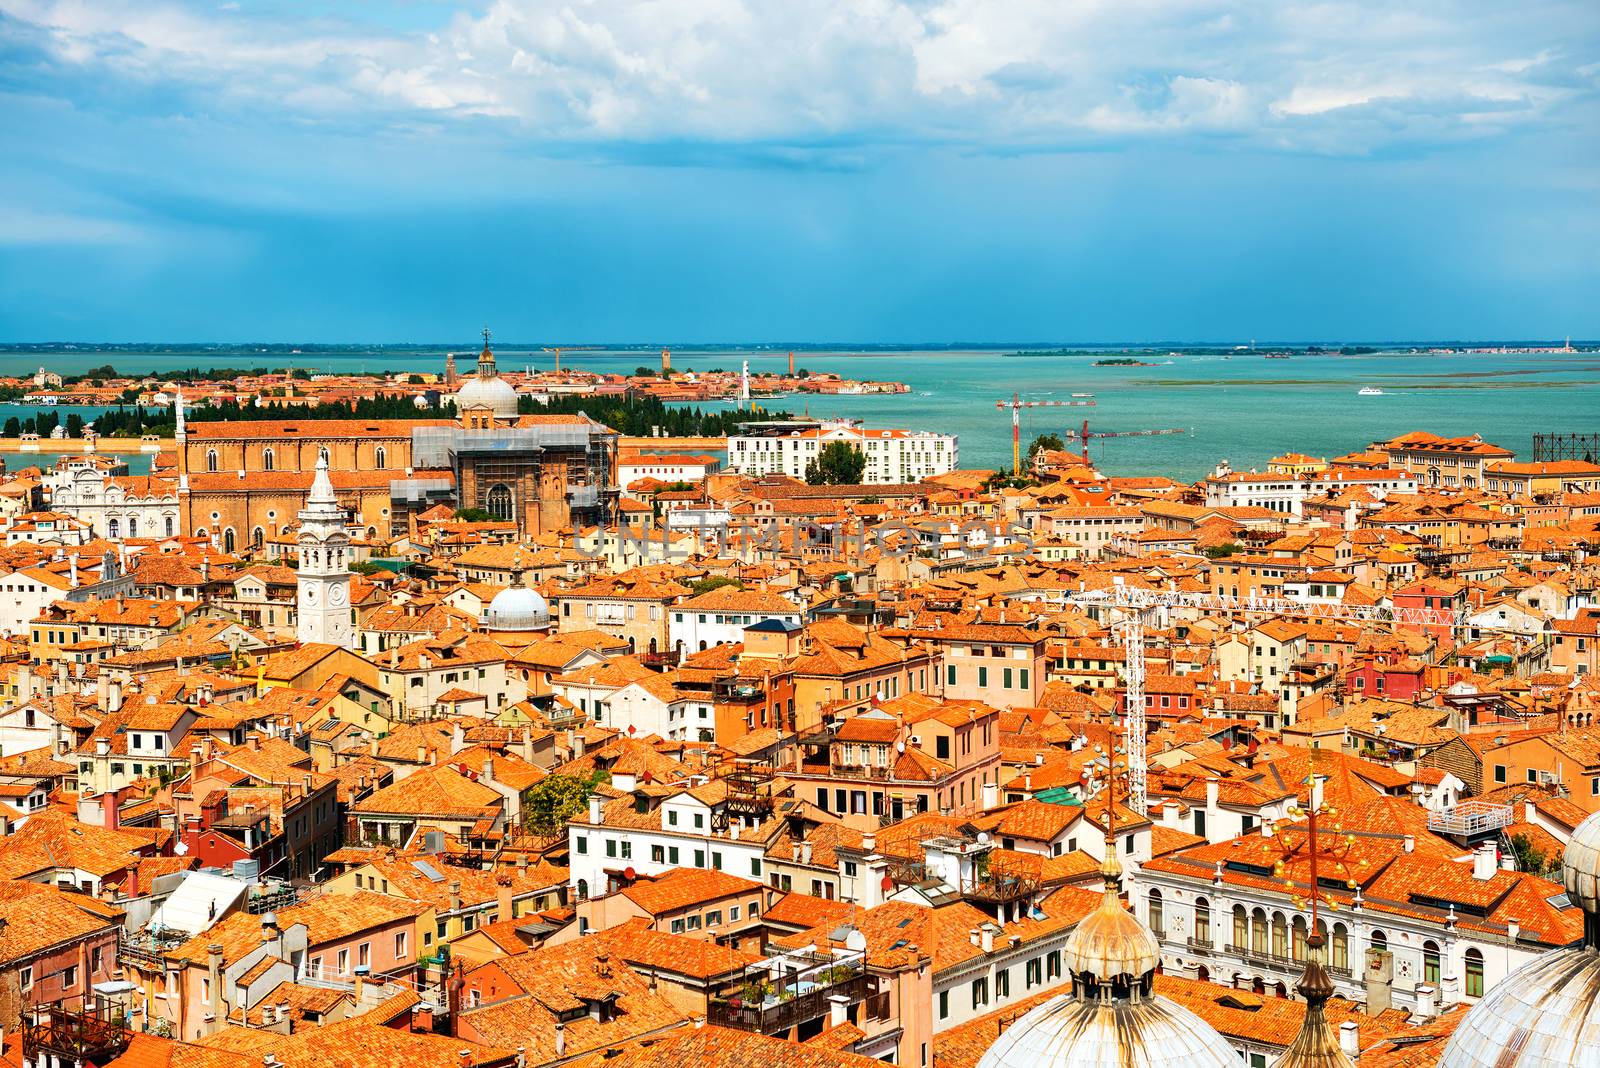 Venice roofs from above by vapi